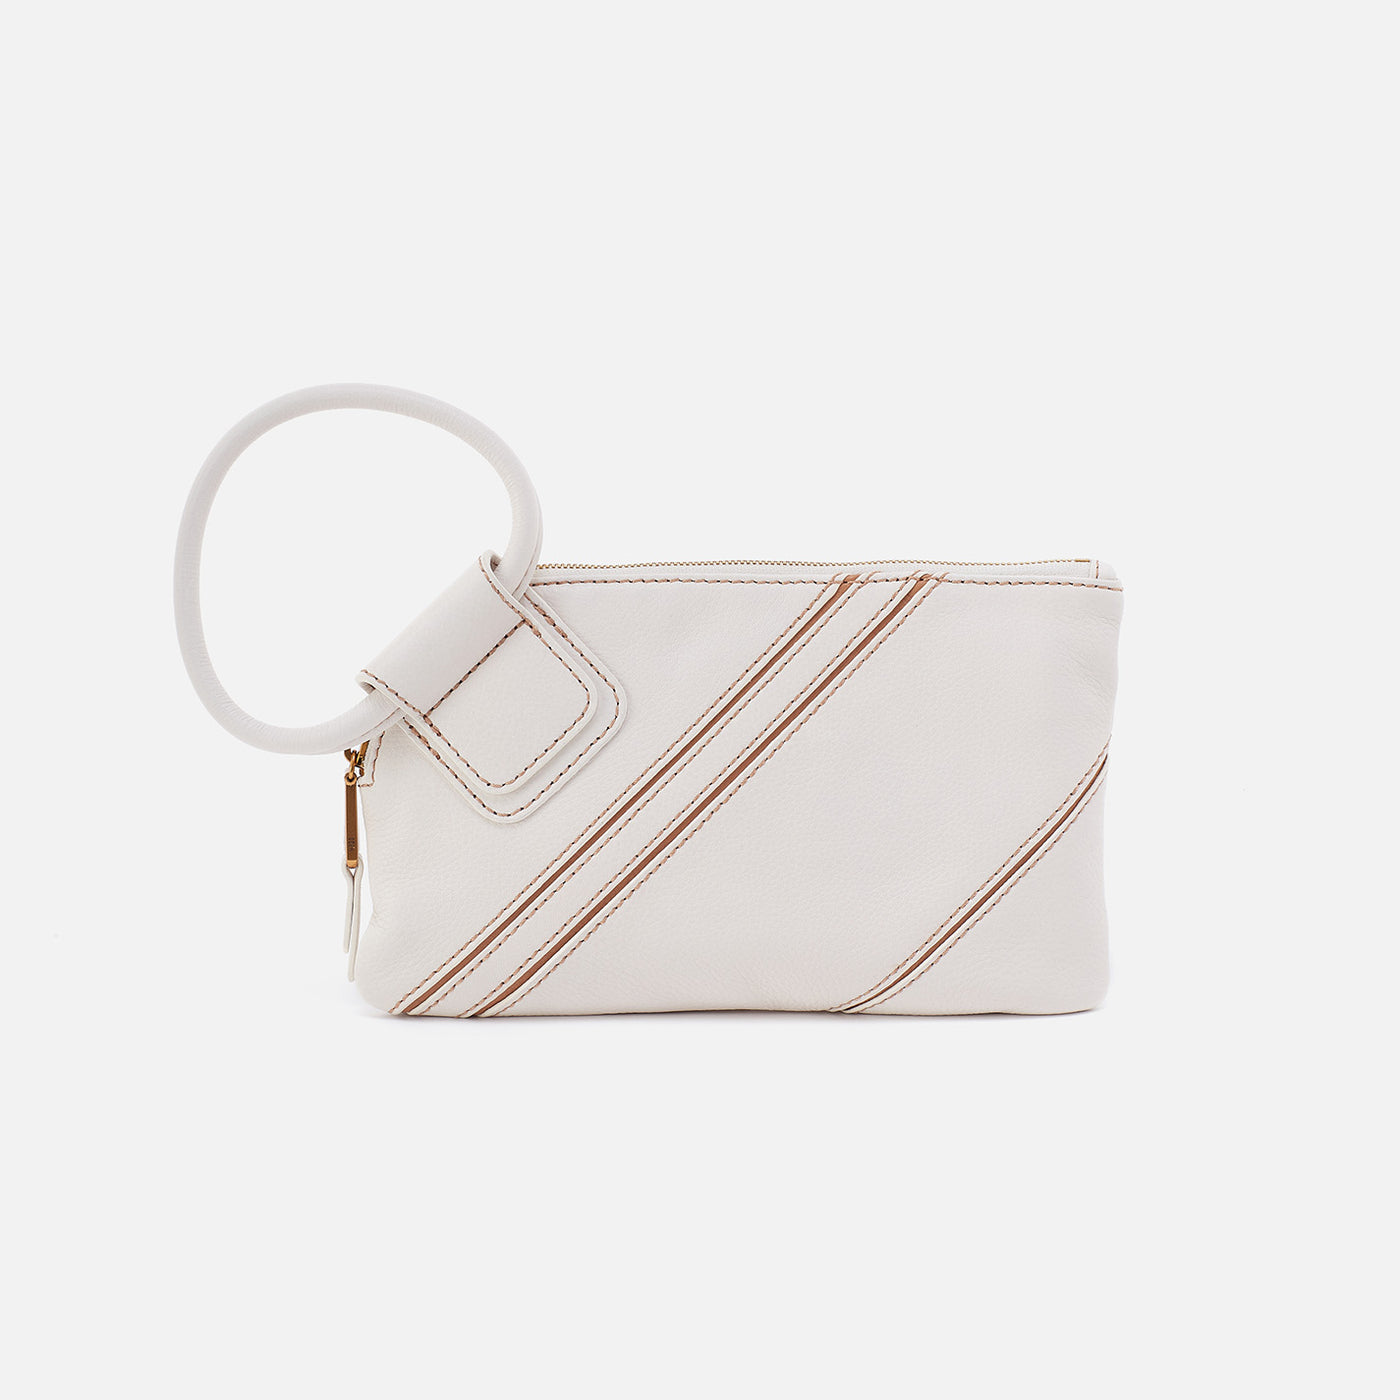 Sable Wristlet in Pebbled Leather - White Stripe